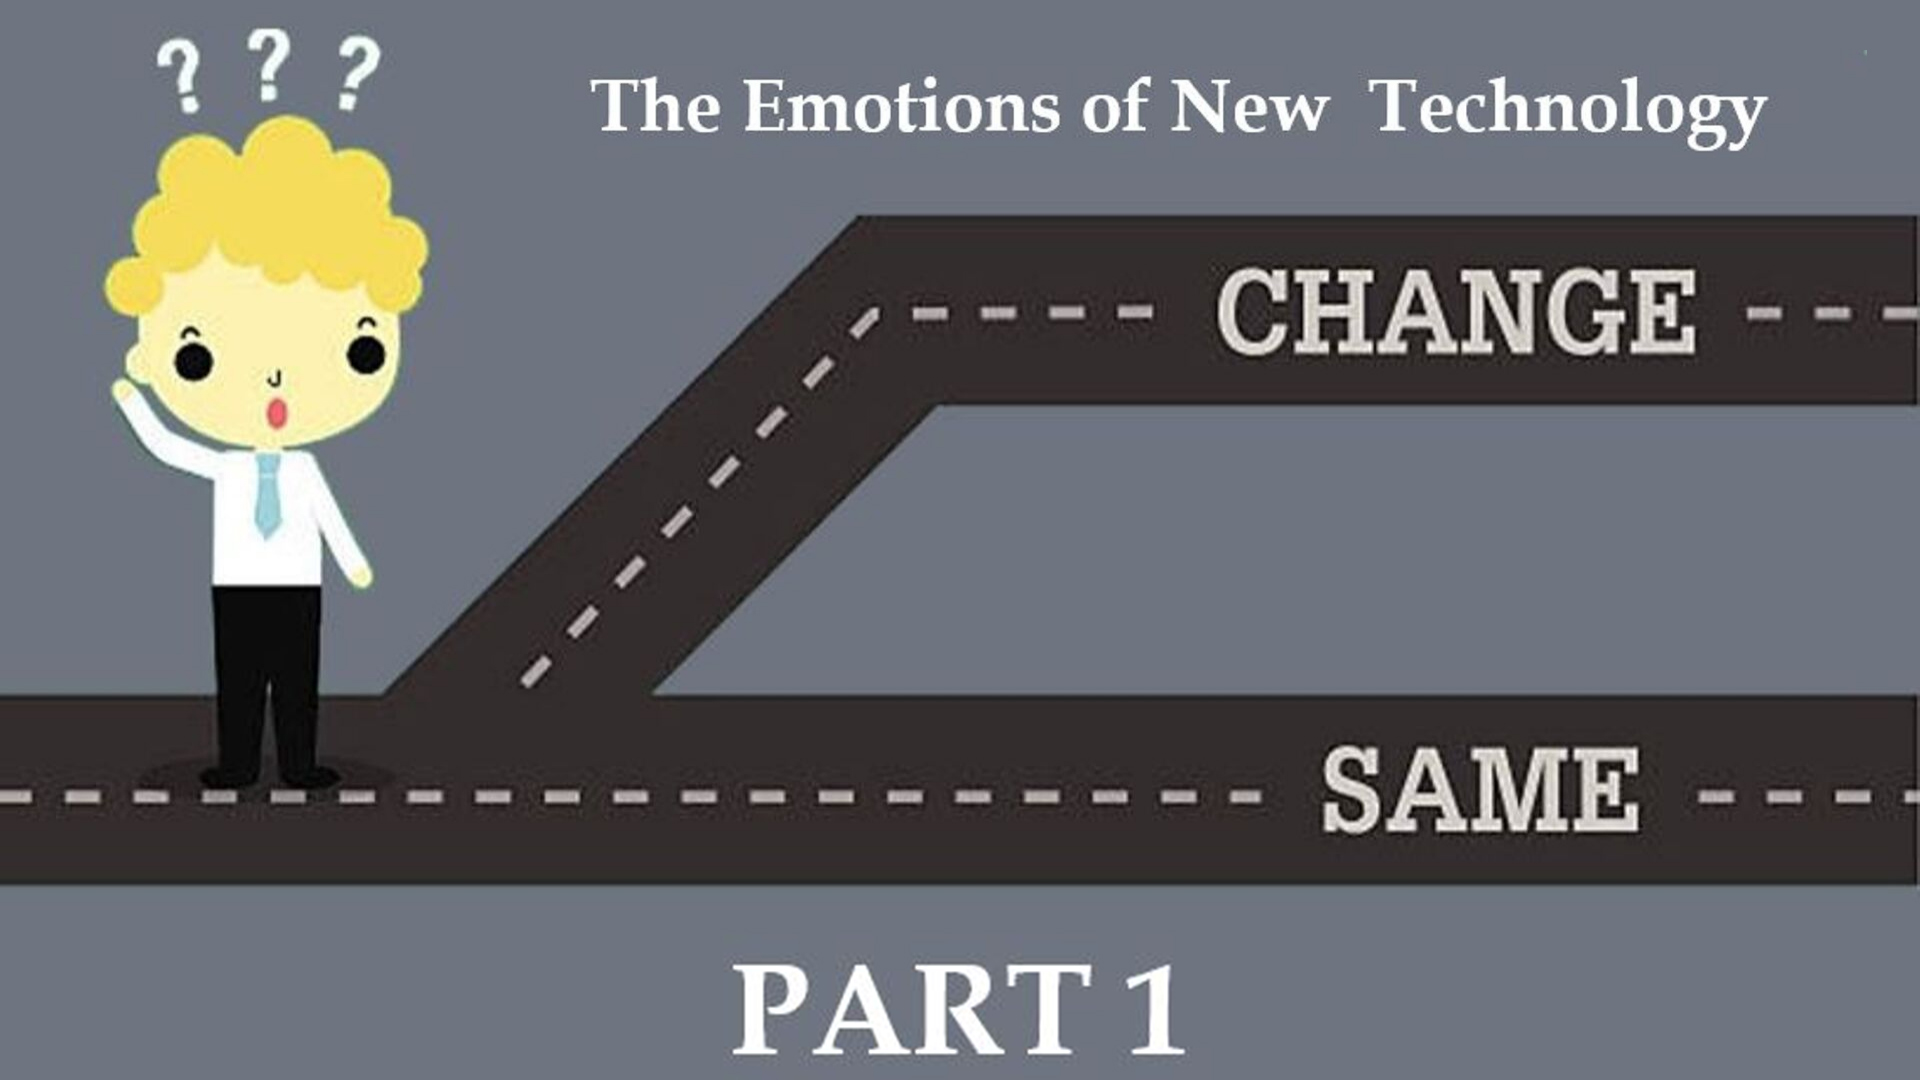 The Fear of Change, Part 1:  The Emotions of an M&A Transaction